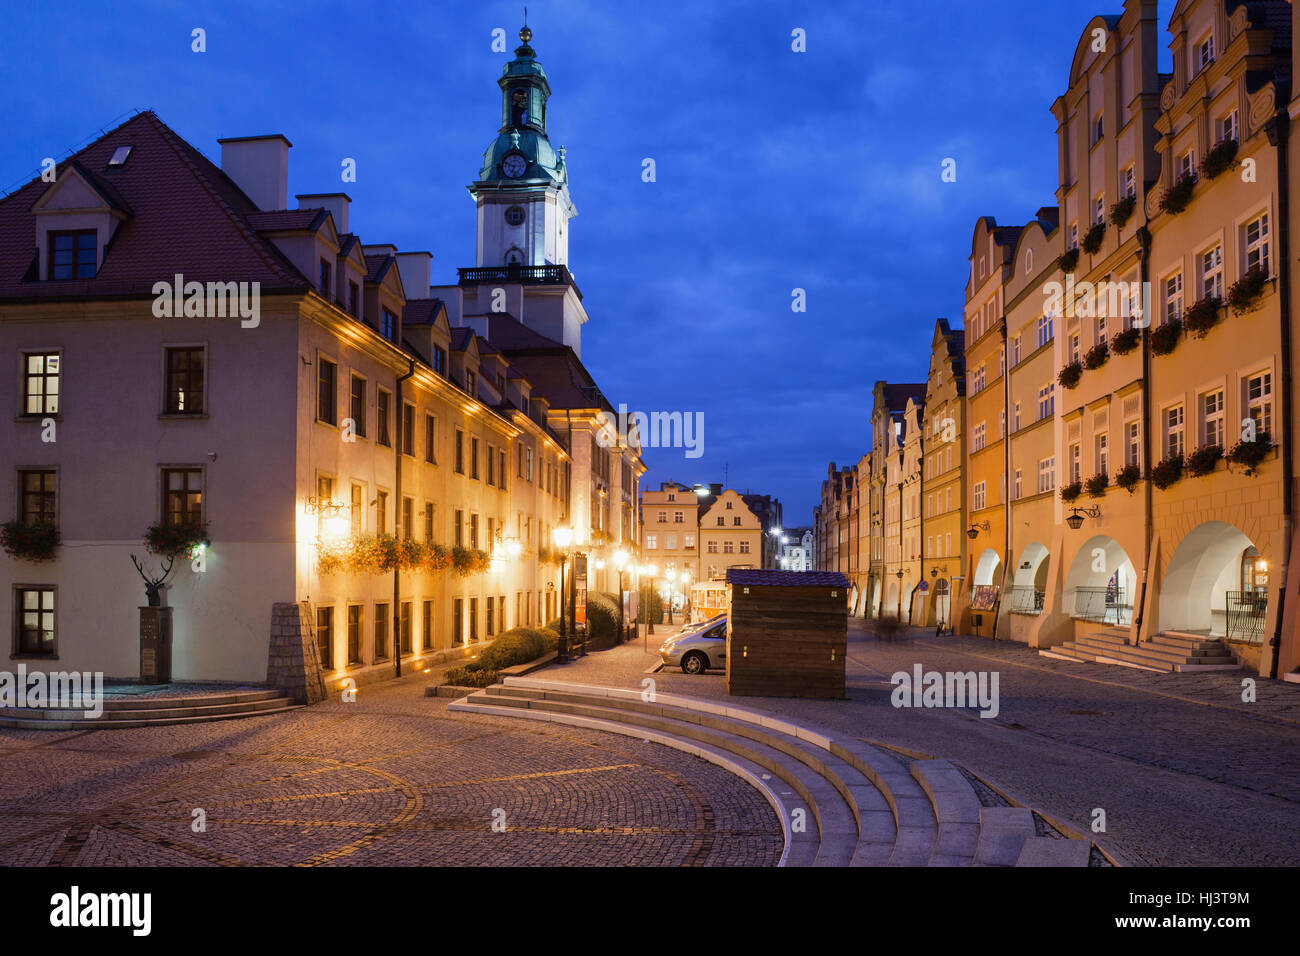 City of Jelenia Gora in Poland, Old Town Market Square by night Stock Photo